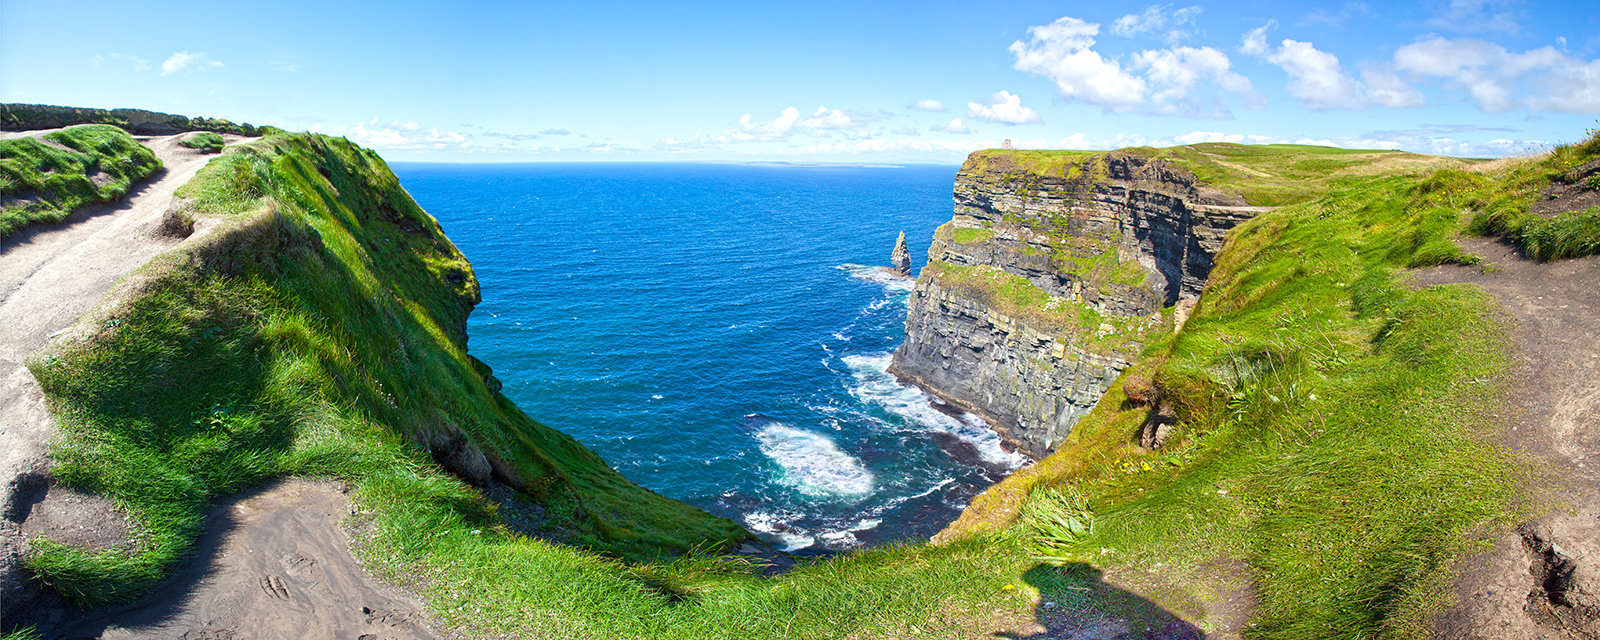 Cliffs Of Moher, County Clare, Ireland. Panoramic